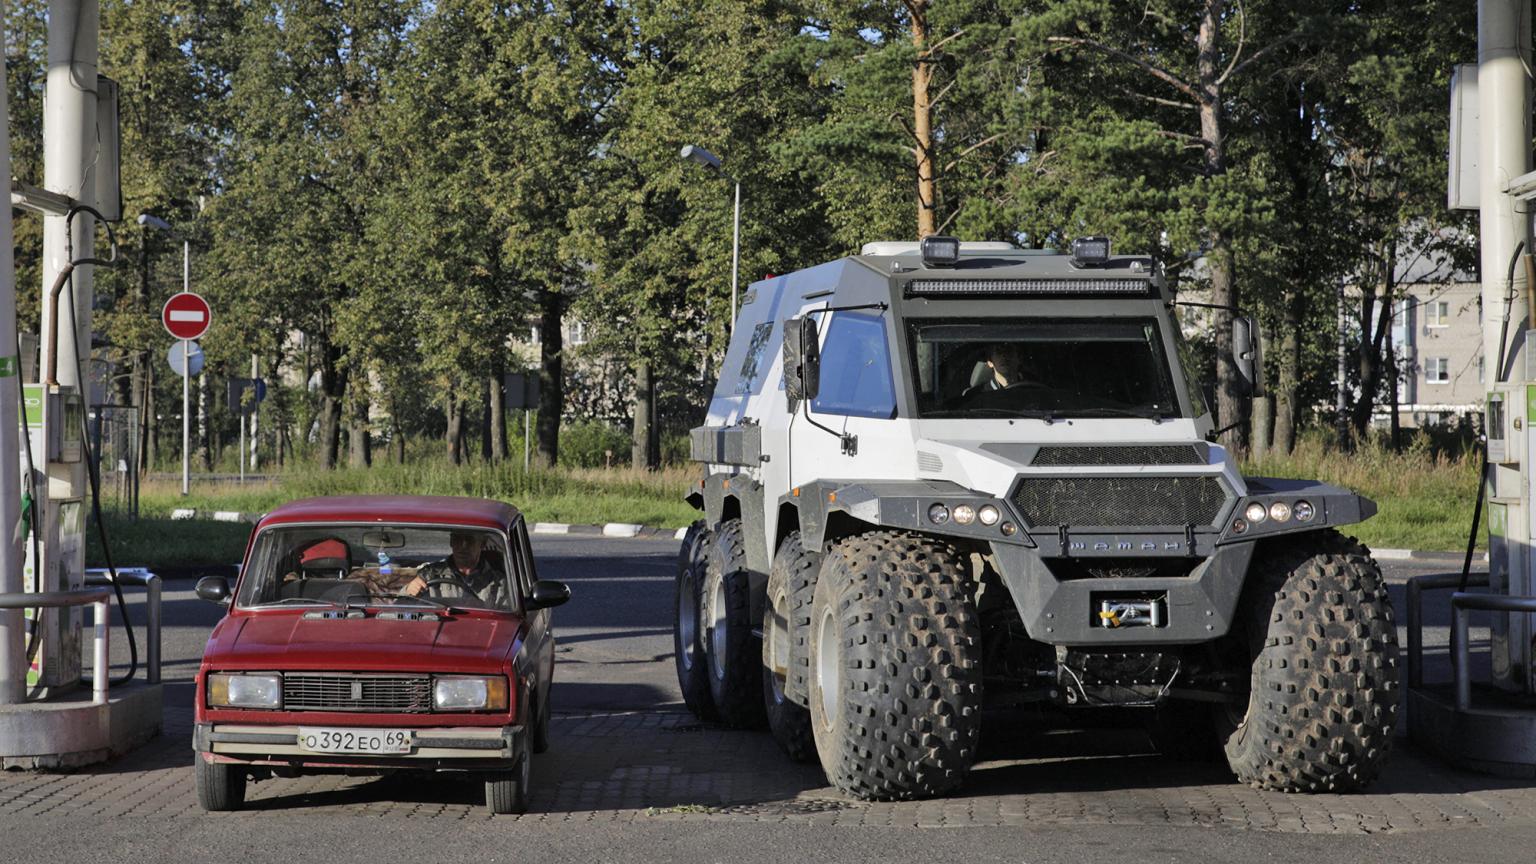 Russian Off Road Vehicles That You Haven't Heard Of - shaman